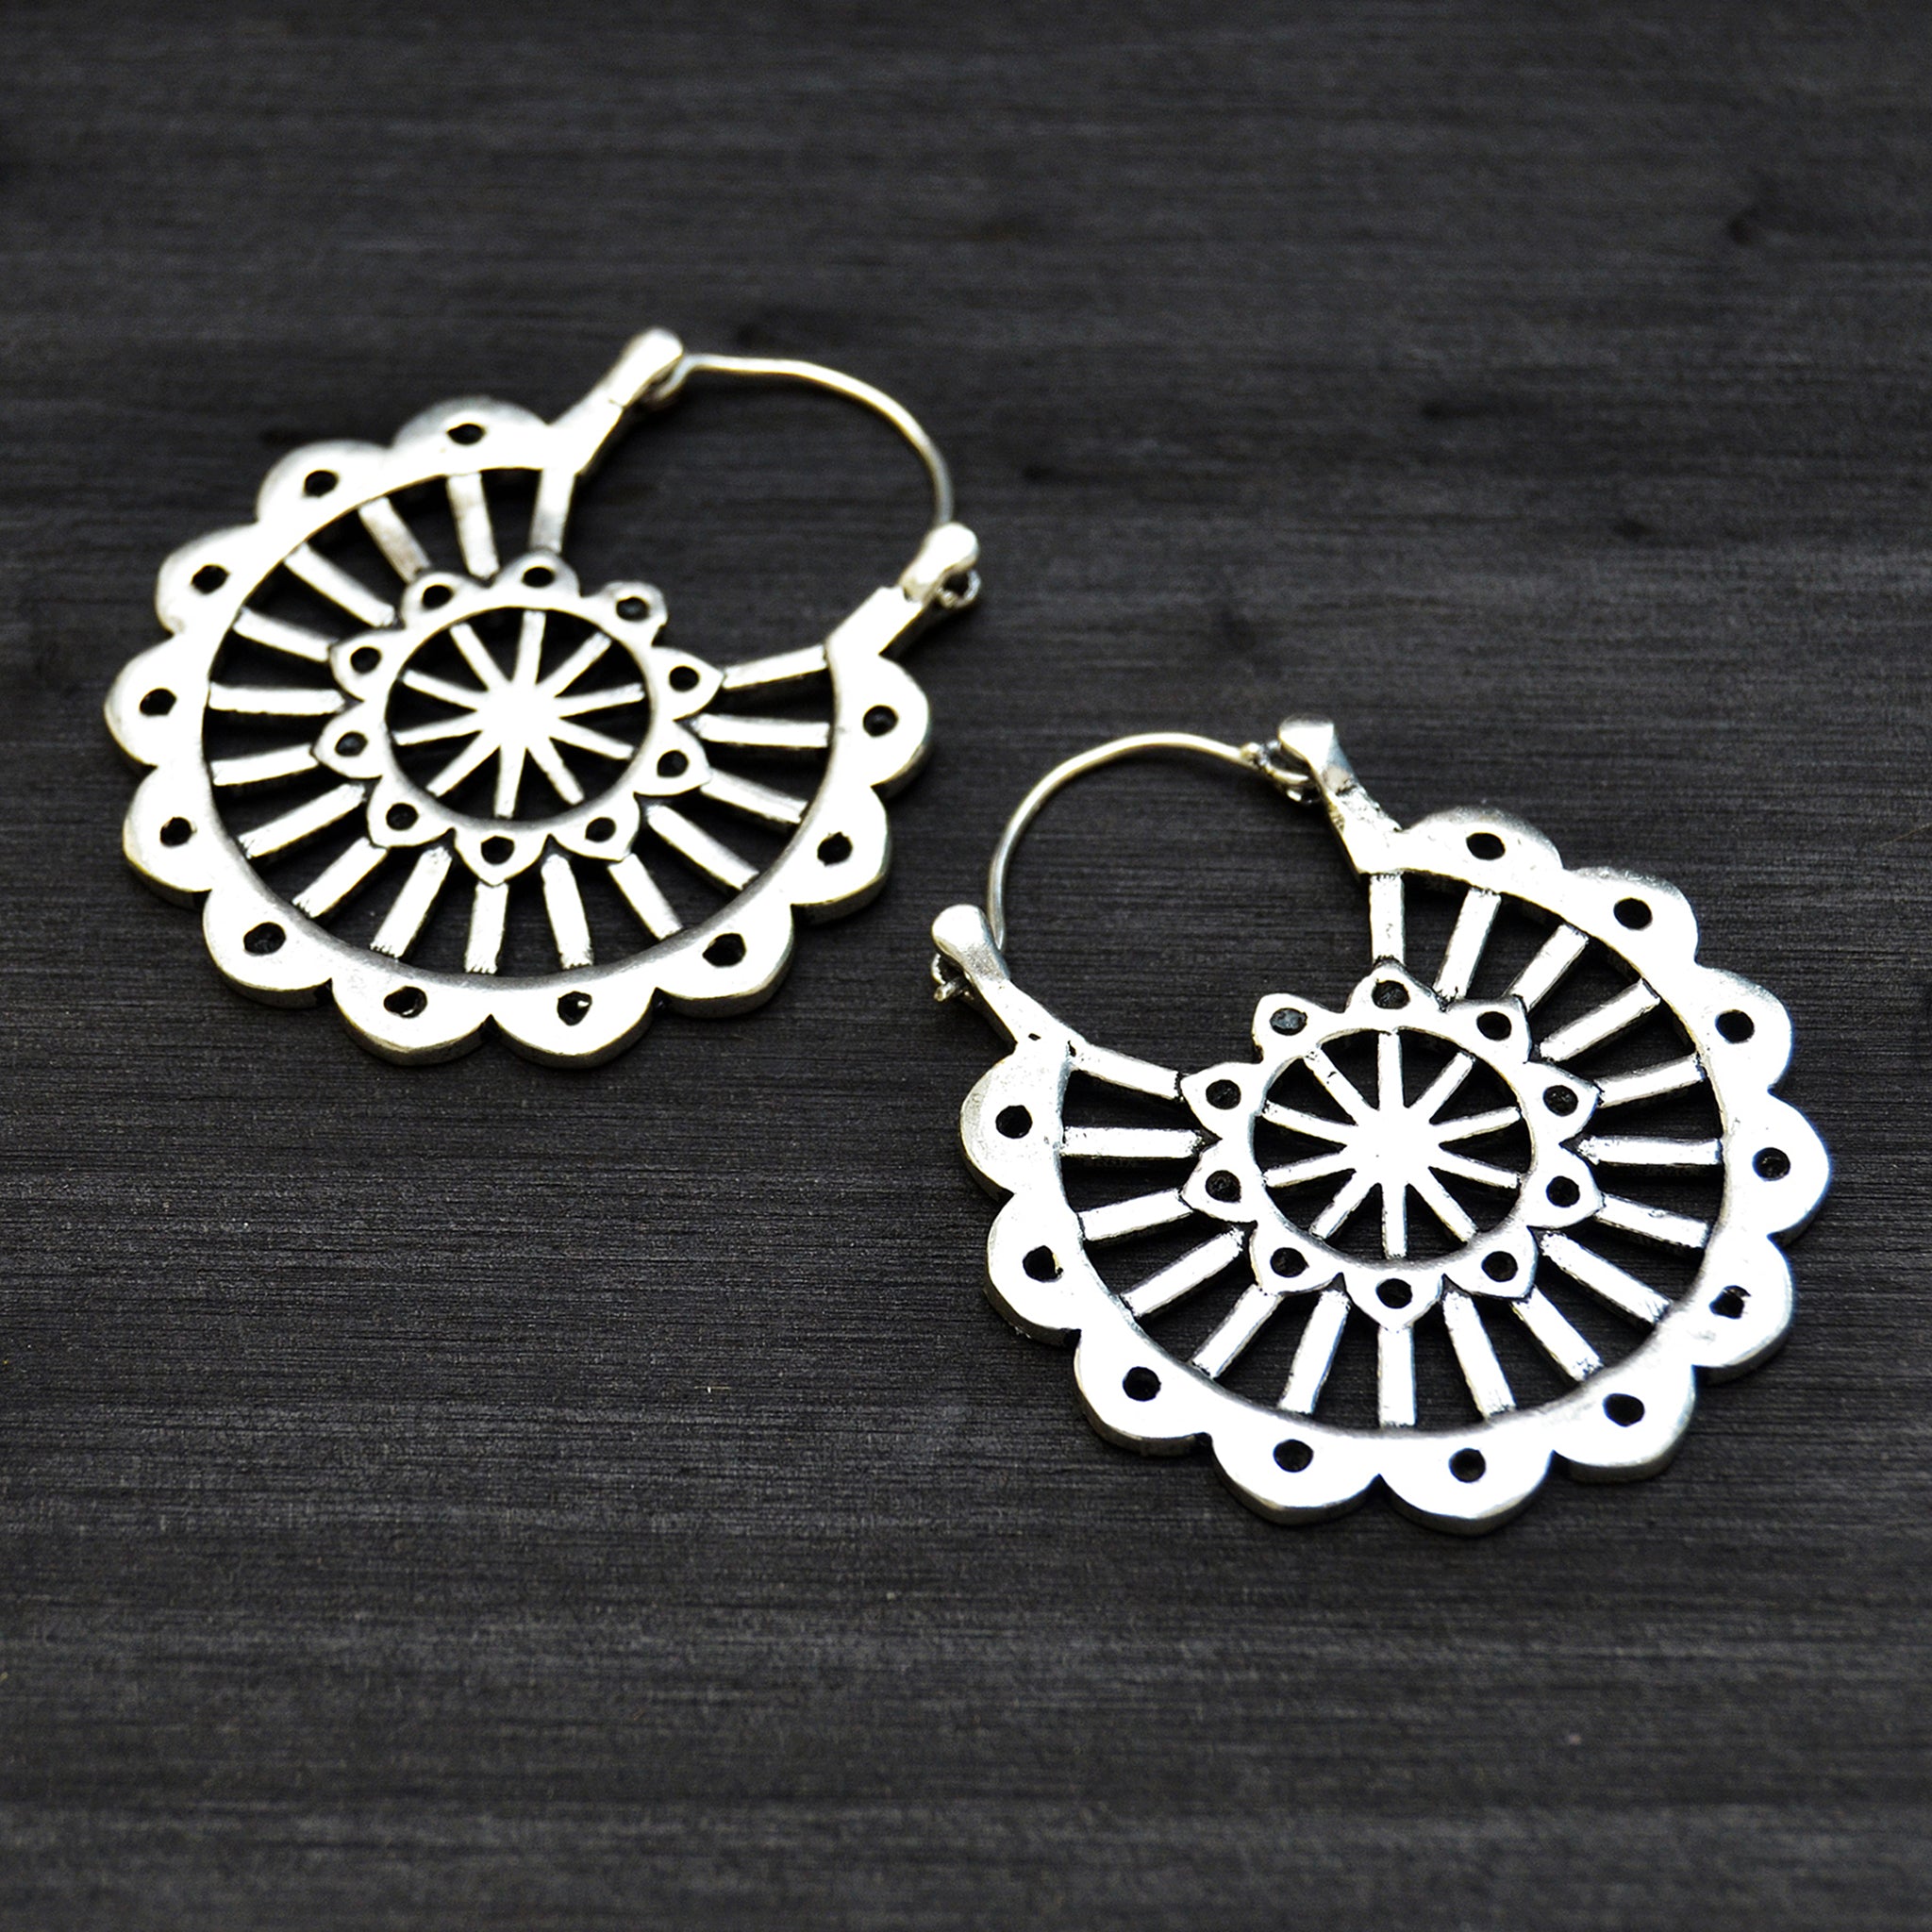 Antique mexican silver mandala earrings in black background